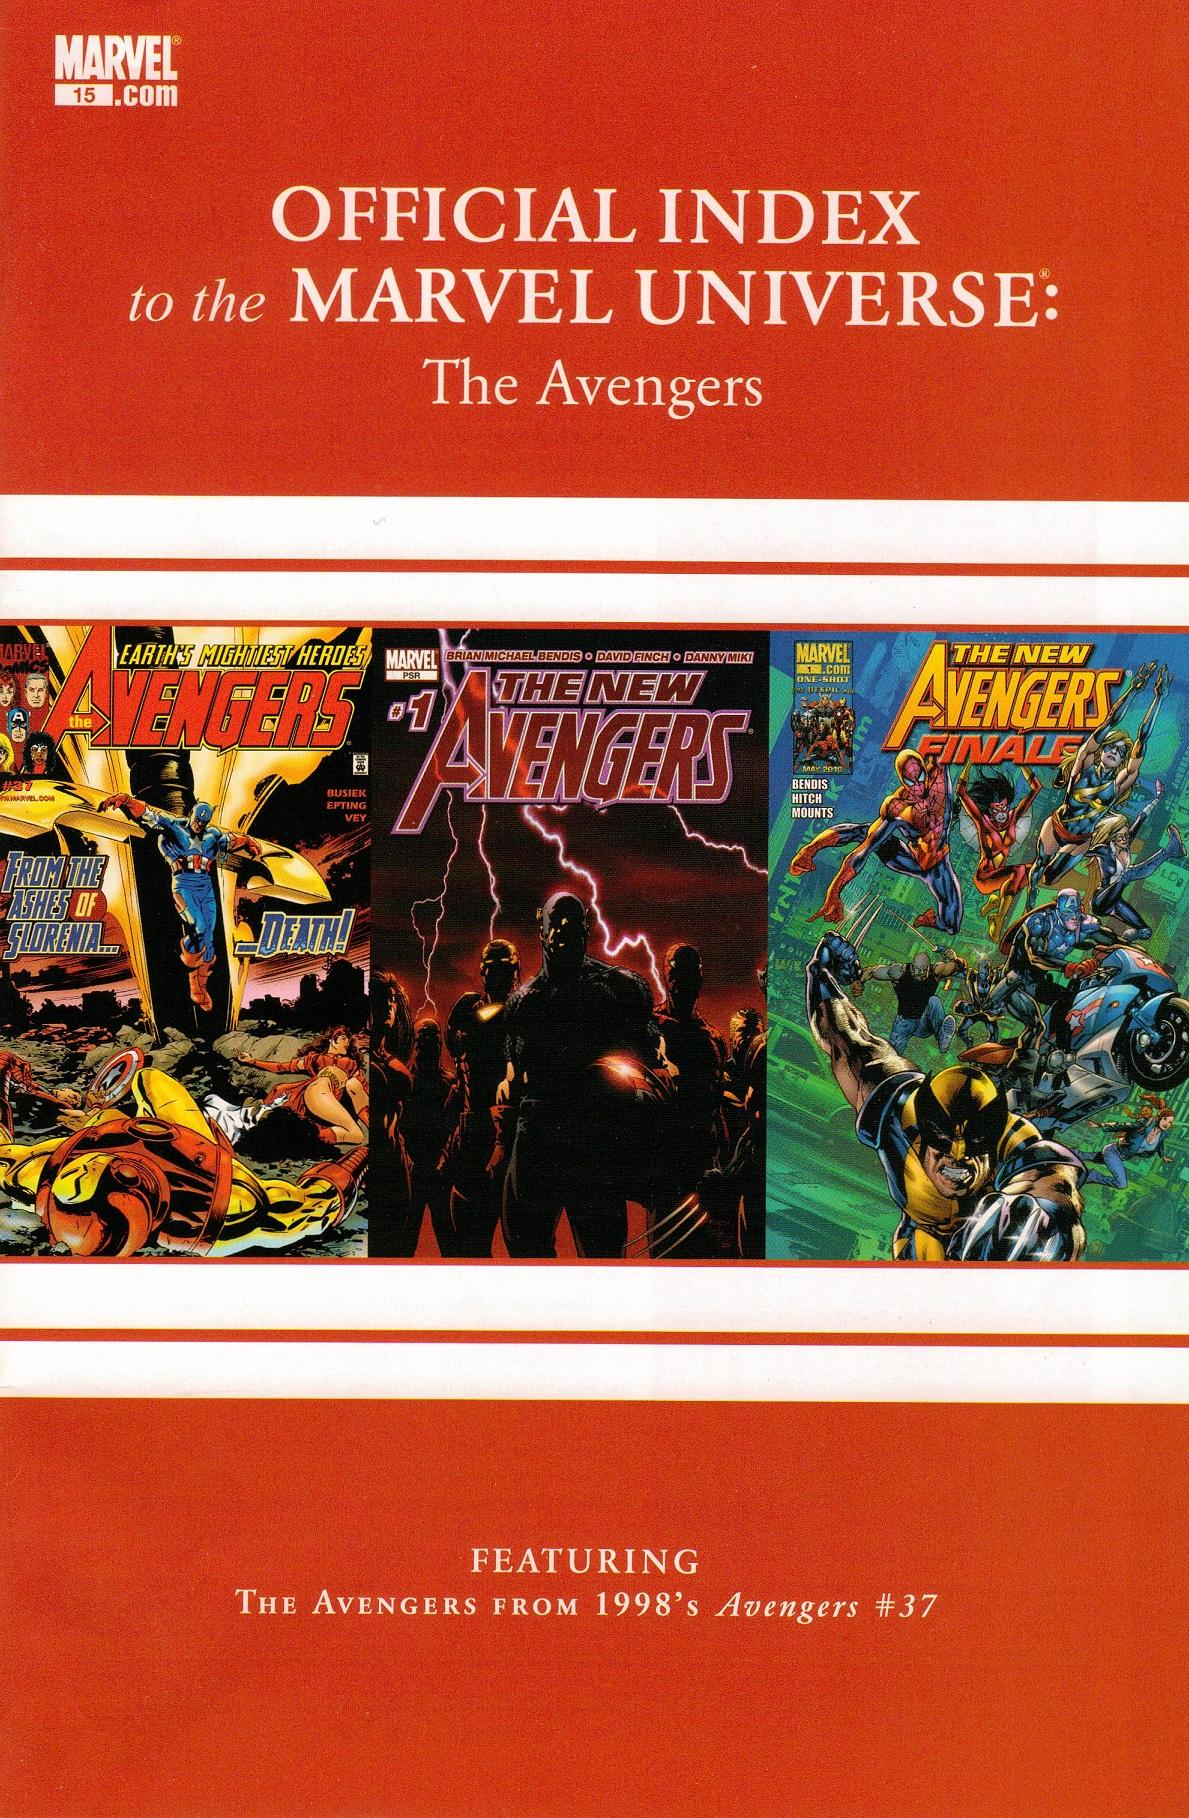 Avengers, Thor & Captain America: Official Index to the Marvel Universe Vol. 1 #15